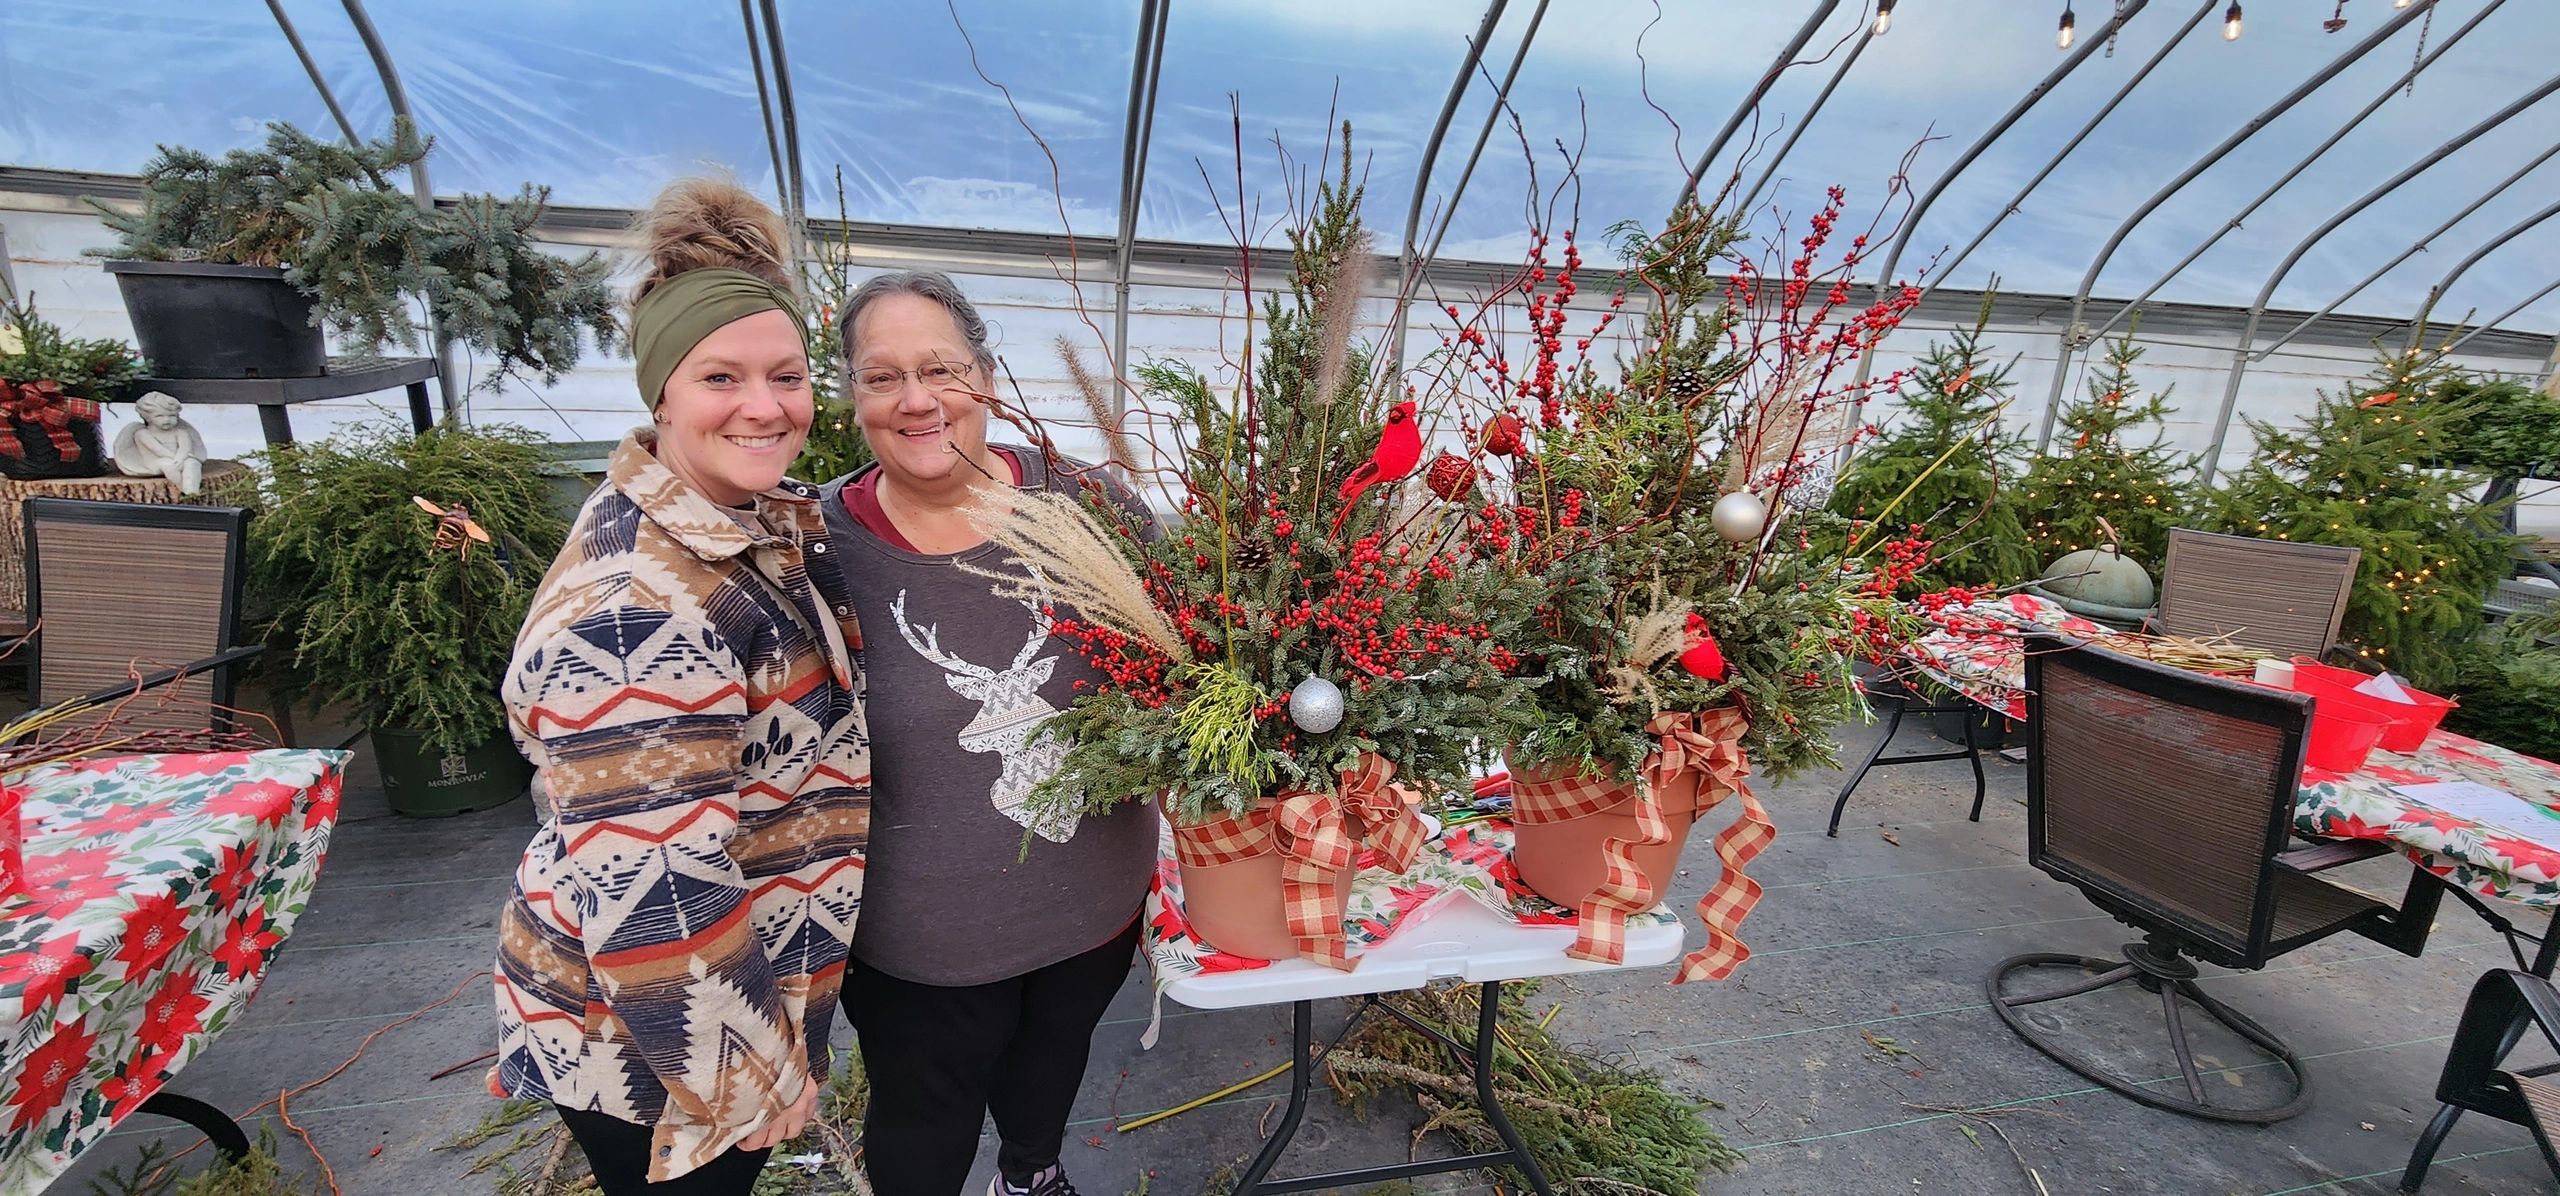 Grinch Tree Centerpiece Workshop - Second Nature at Reads Creek